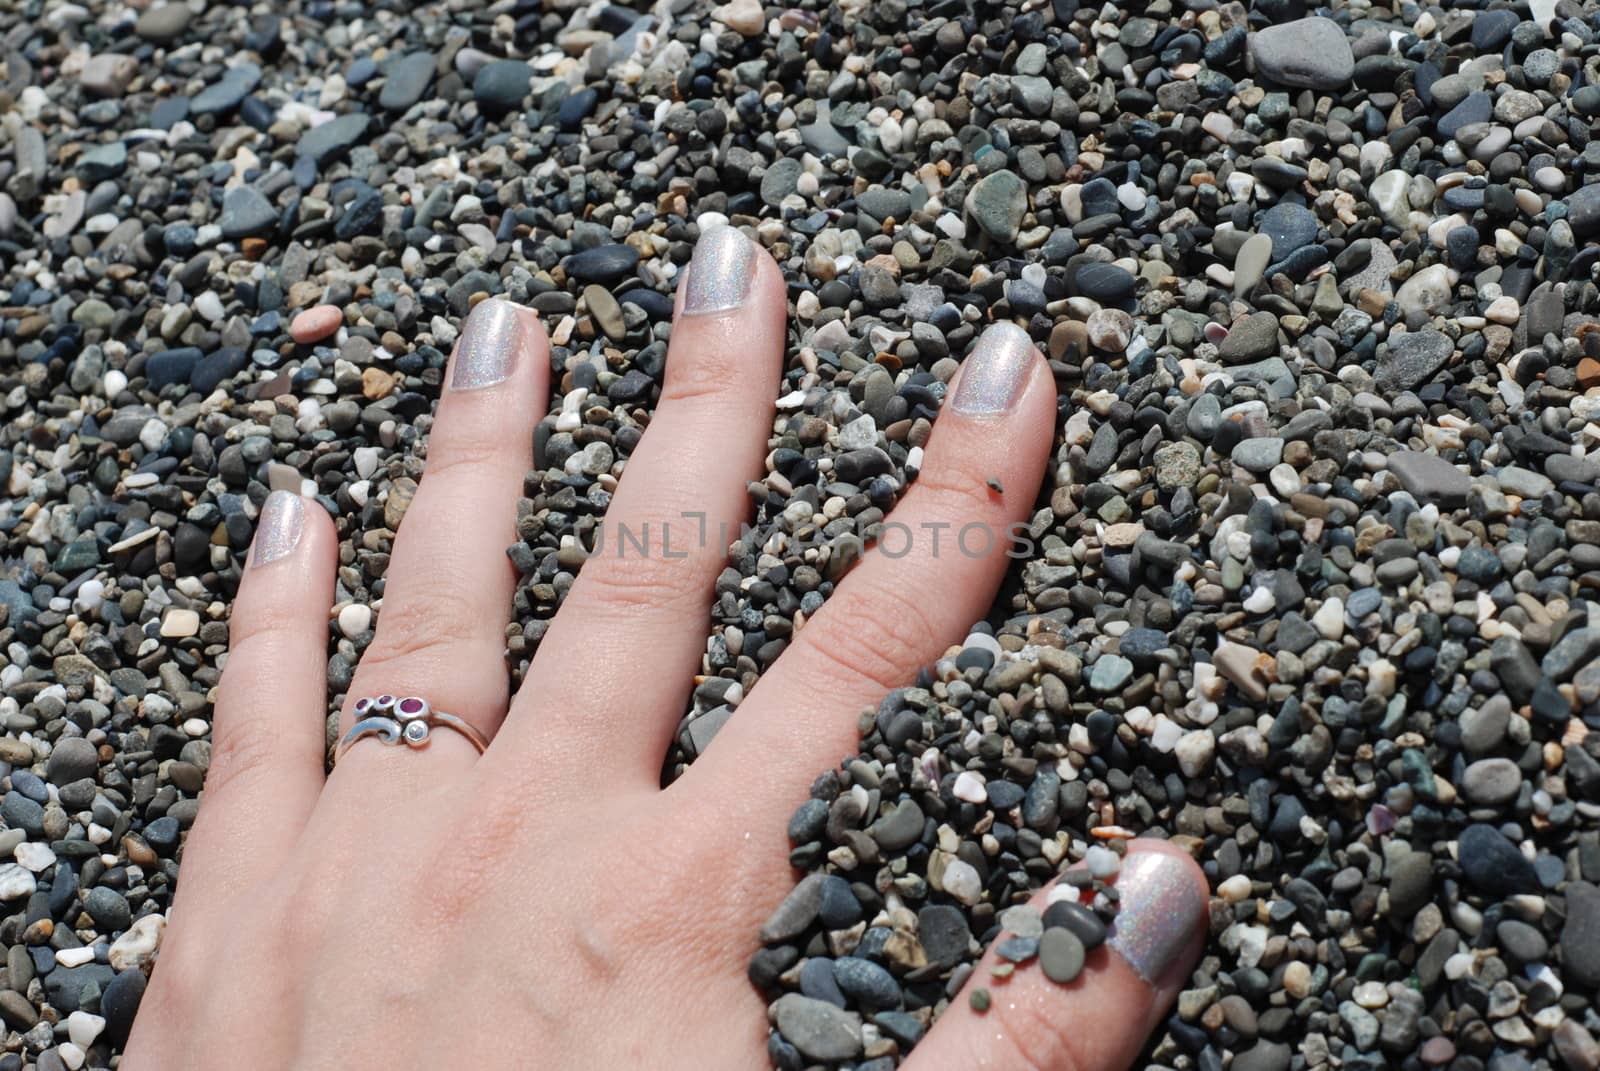 Girls hand with a ring on a finger in a pebble